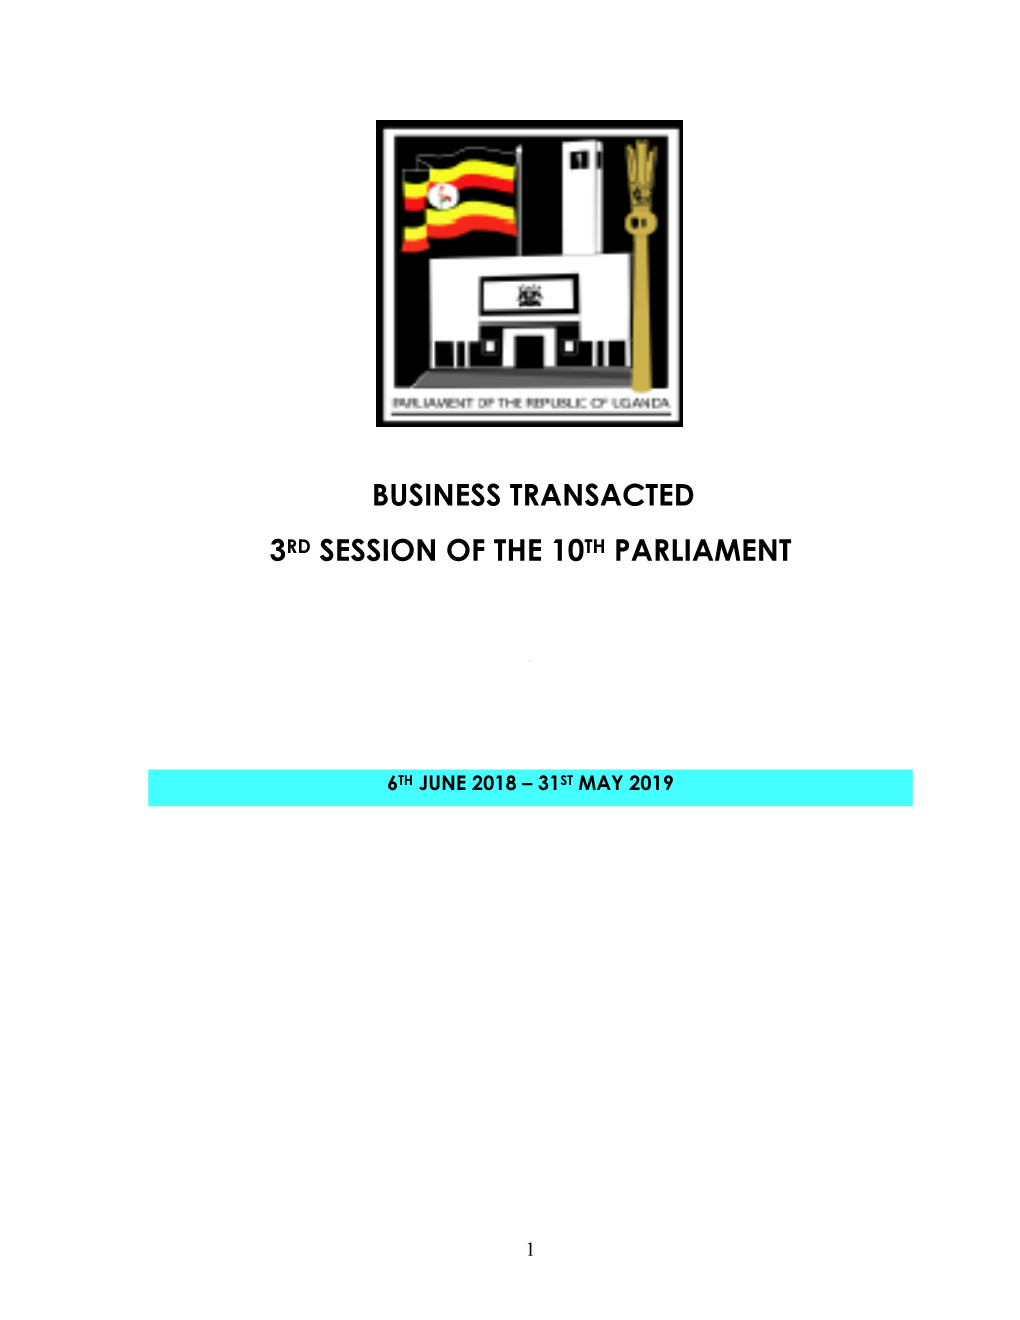 Business Transacted 3Rd Session of the 10Th Parliament